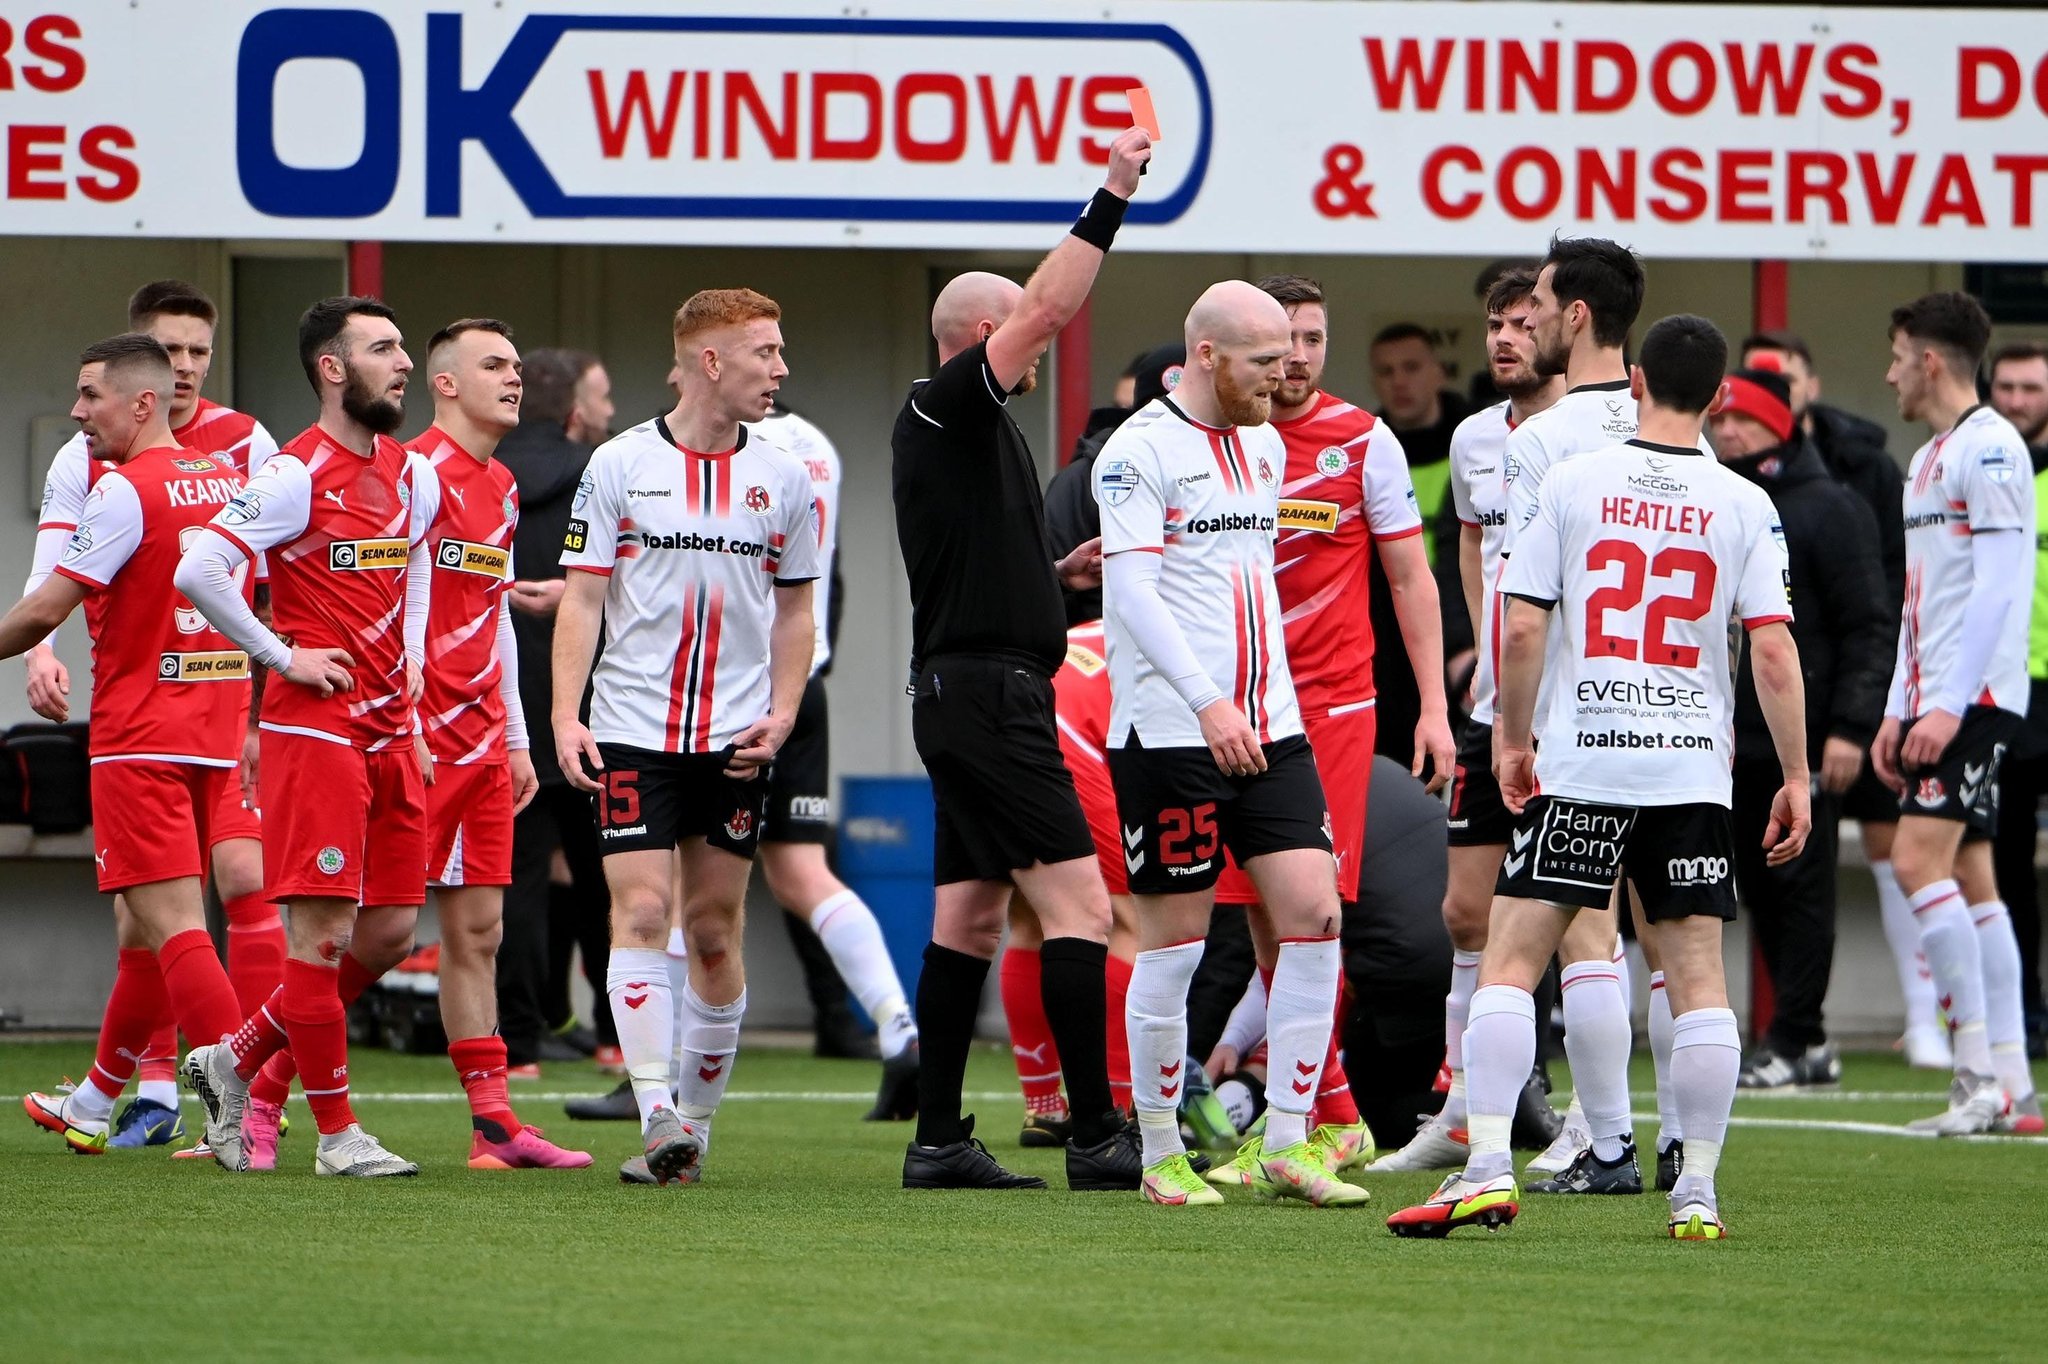 Derby joy for Cliftonville as Larne see off Dungannon